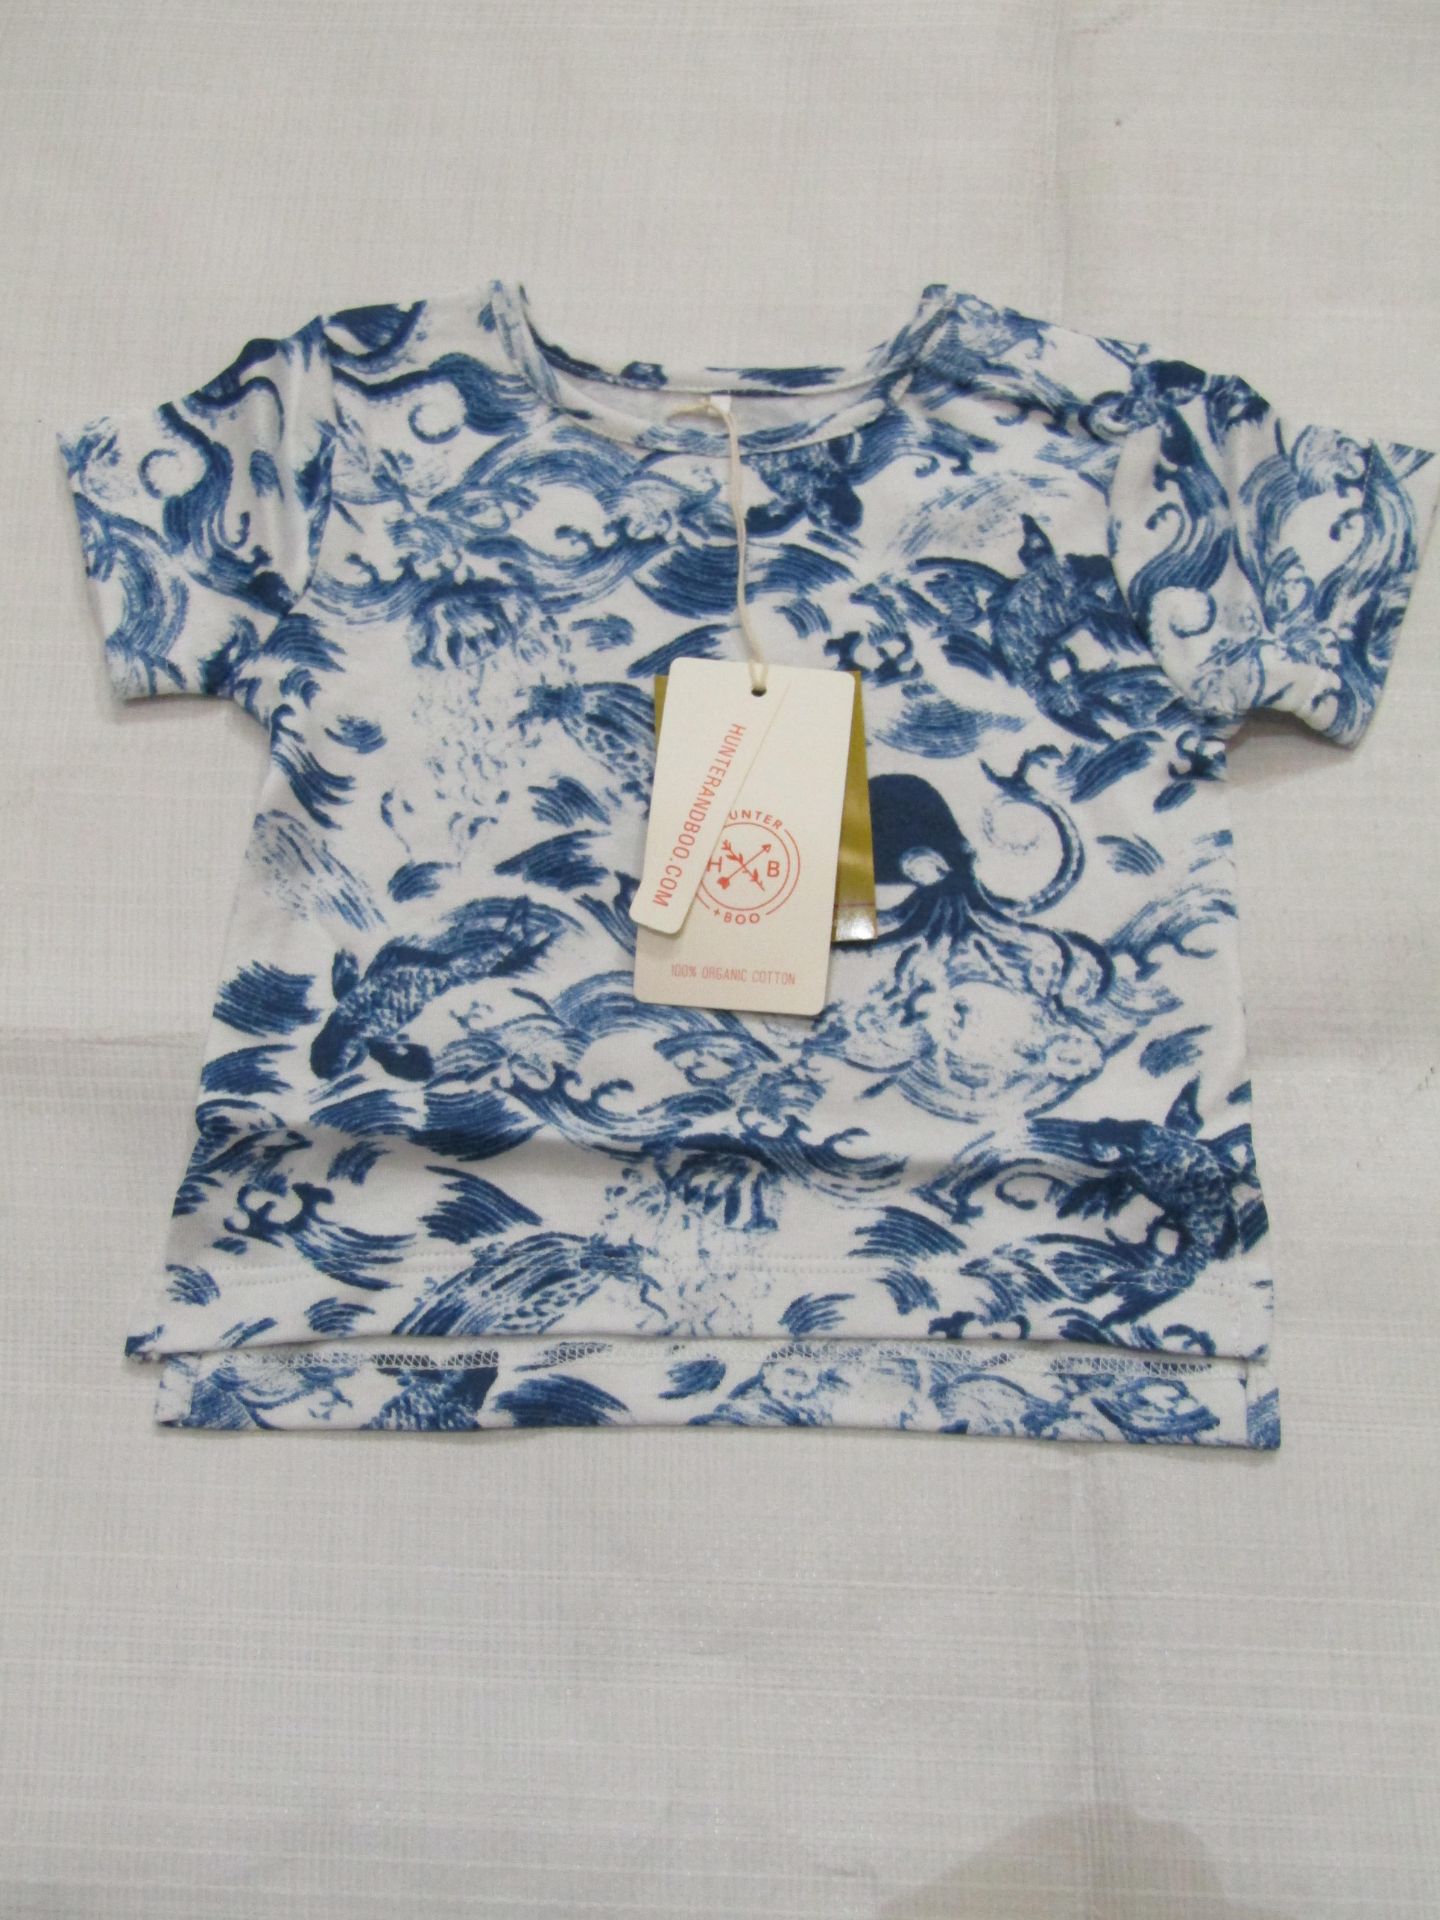 2 X Hunter & Boo Kayio Print T/Shirts Blue/White Aged 3-6 Months New & Packaged RRP £13 Each